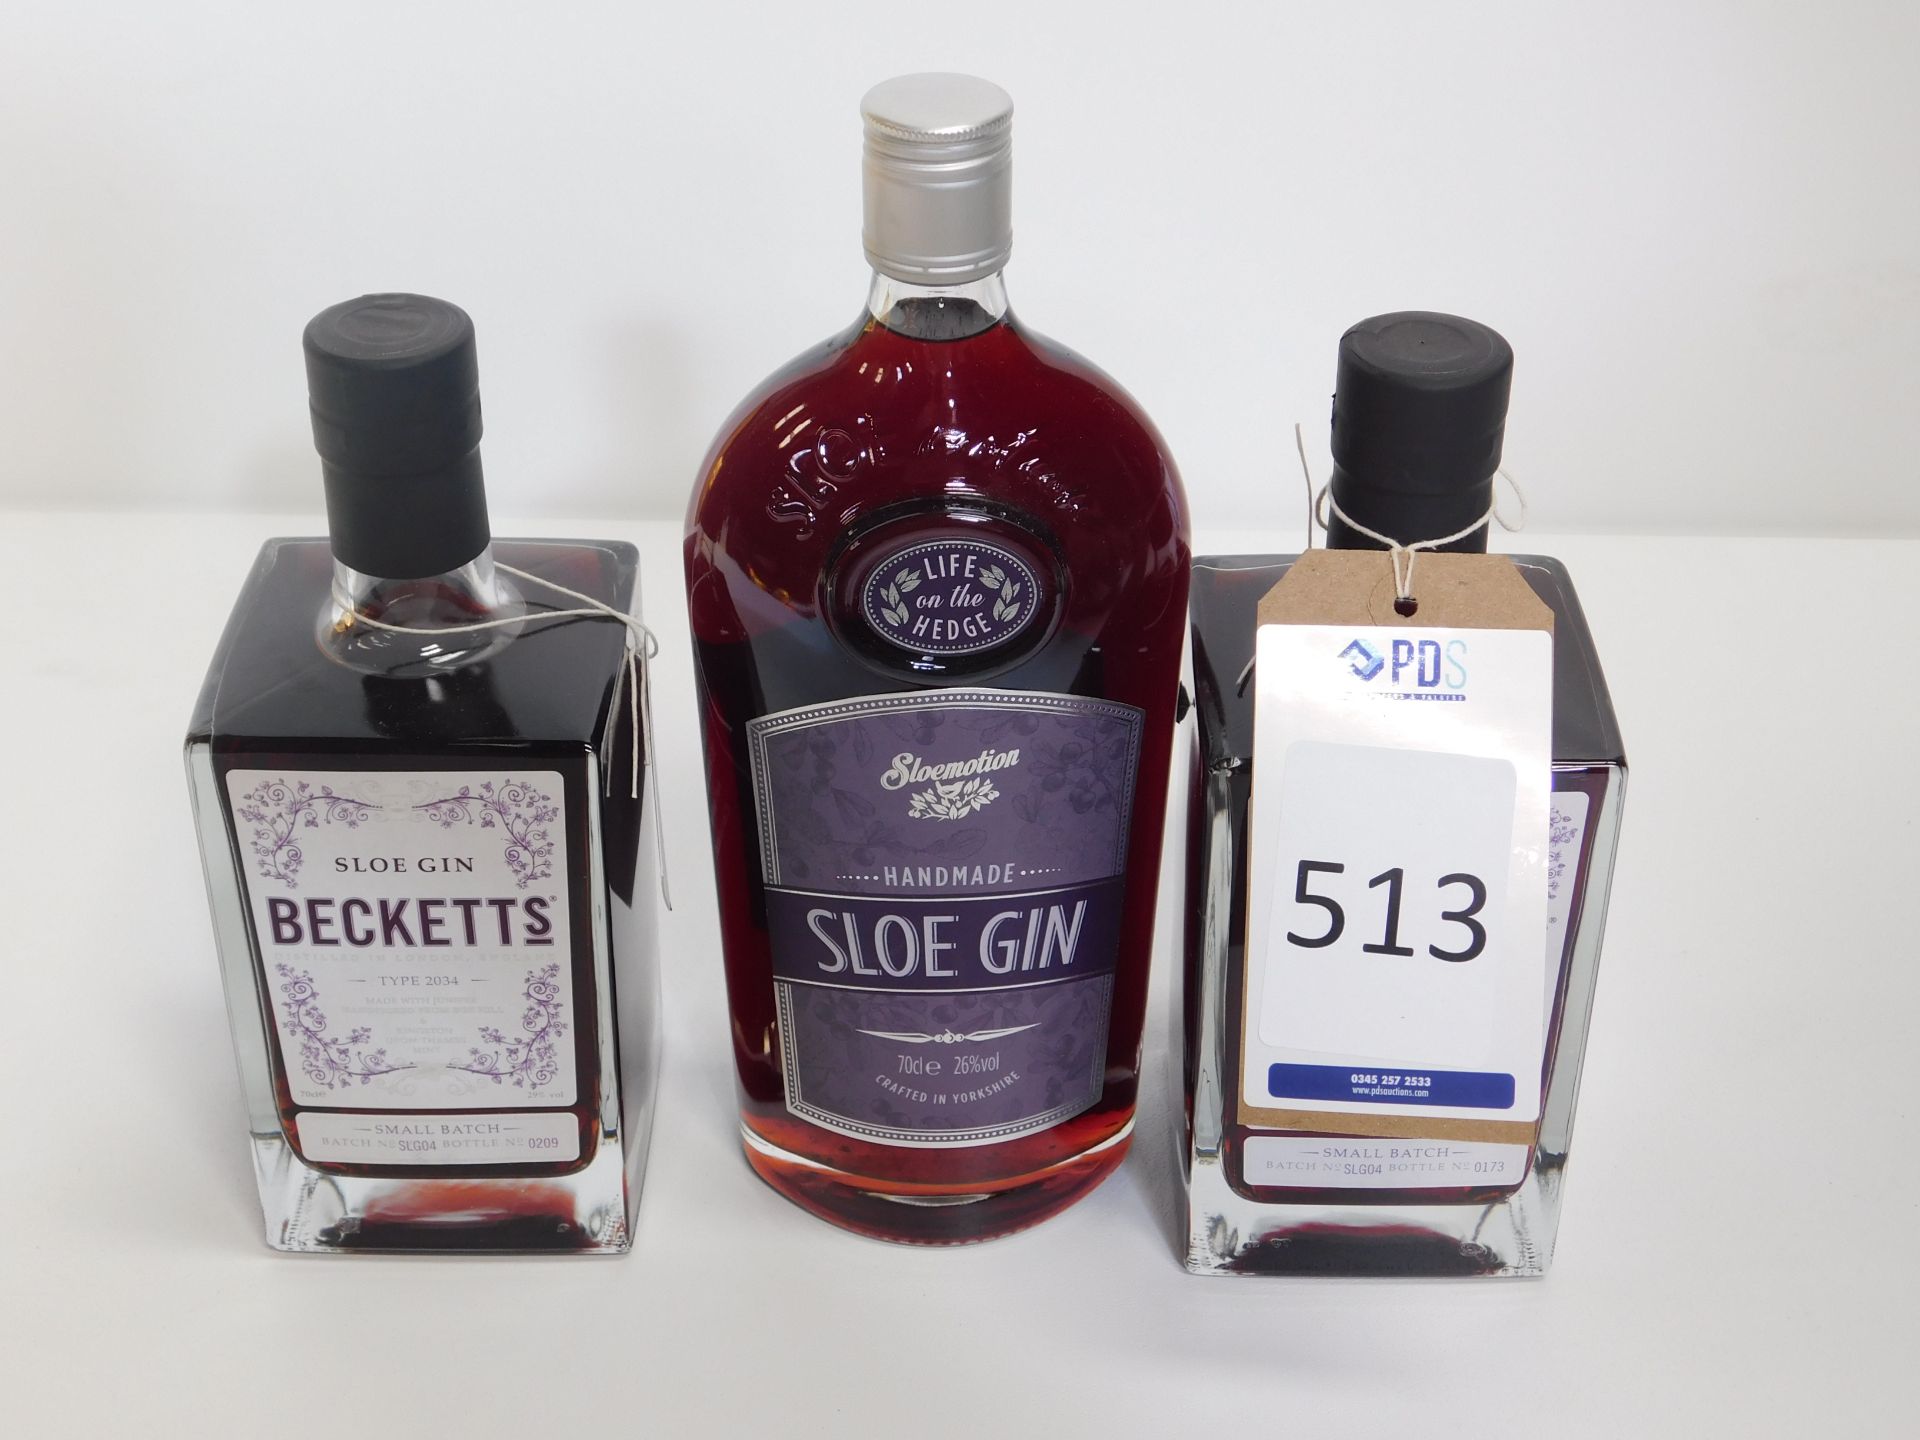 2 Bottles Becketts Sloe Gin Type 2034, & Sloemotion Sloe Gin, 70cl (Located: Brentwood. Please Refer